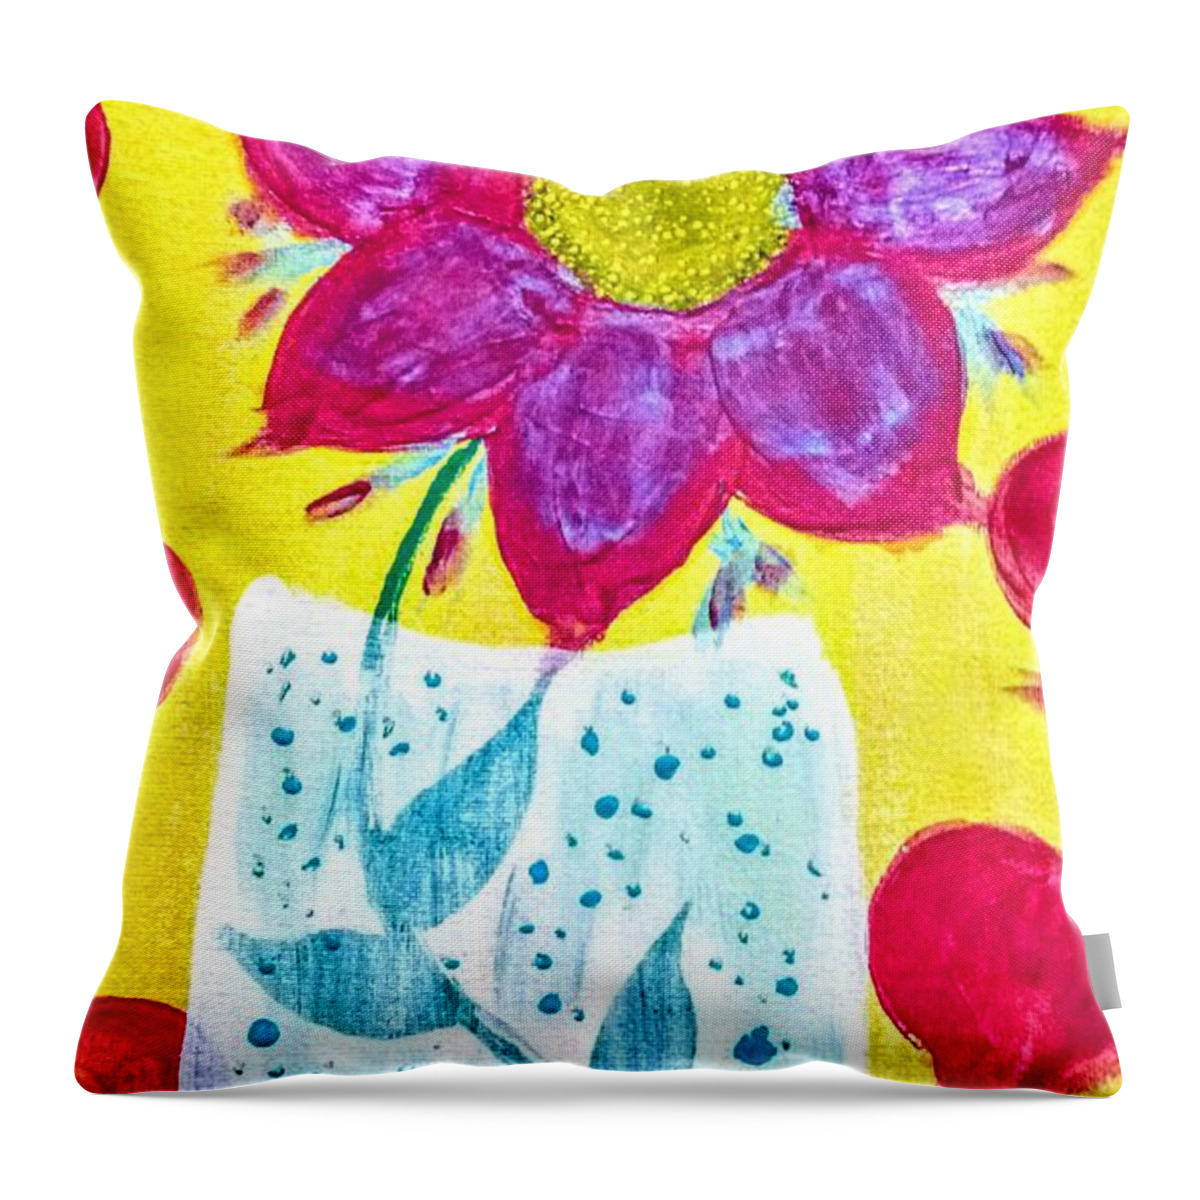 Flower Throw Pillow featuring the painting Bright Flower by Anna Adams